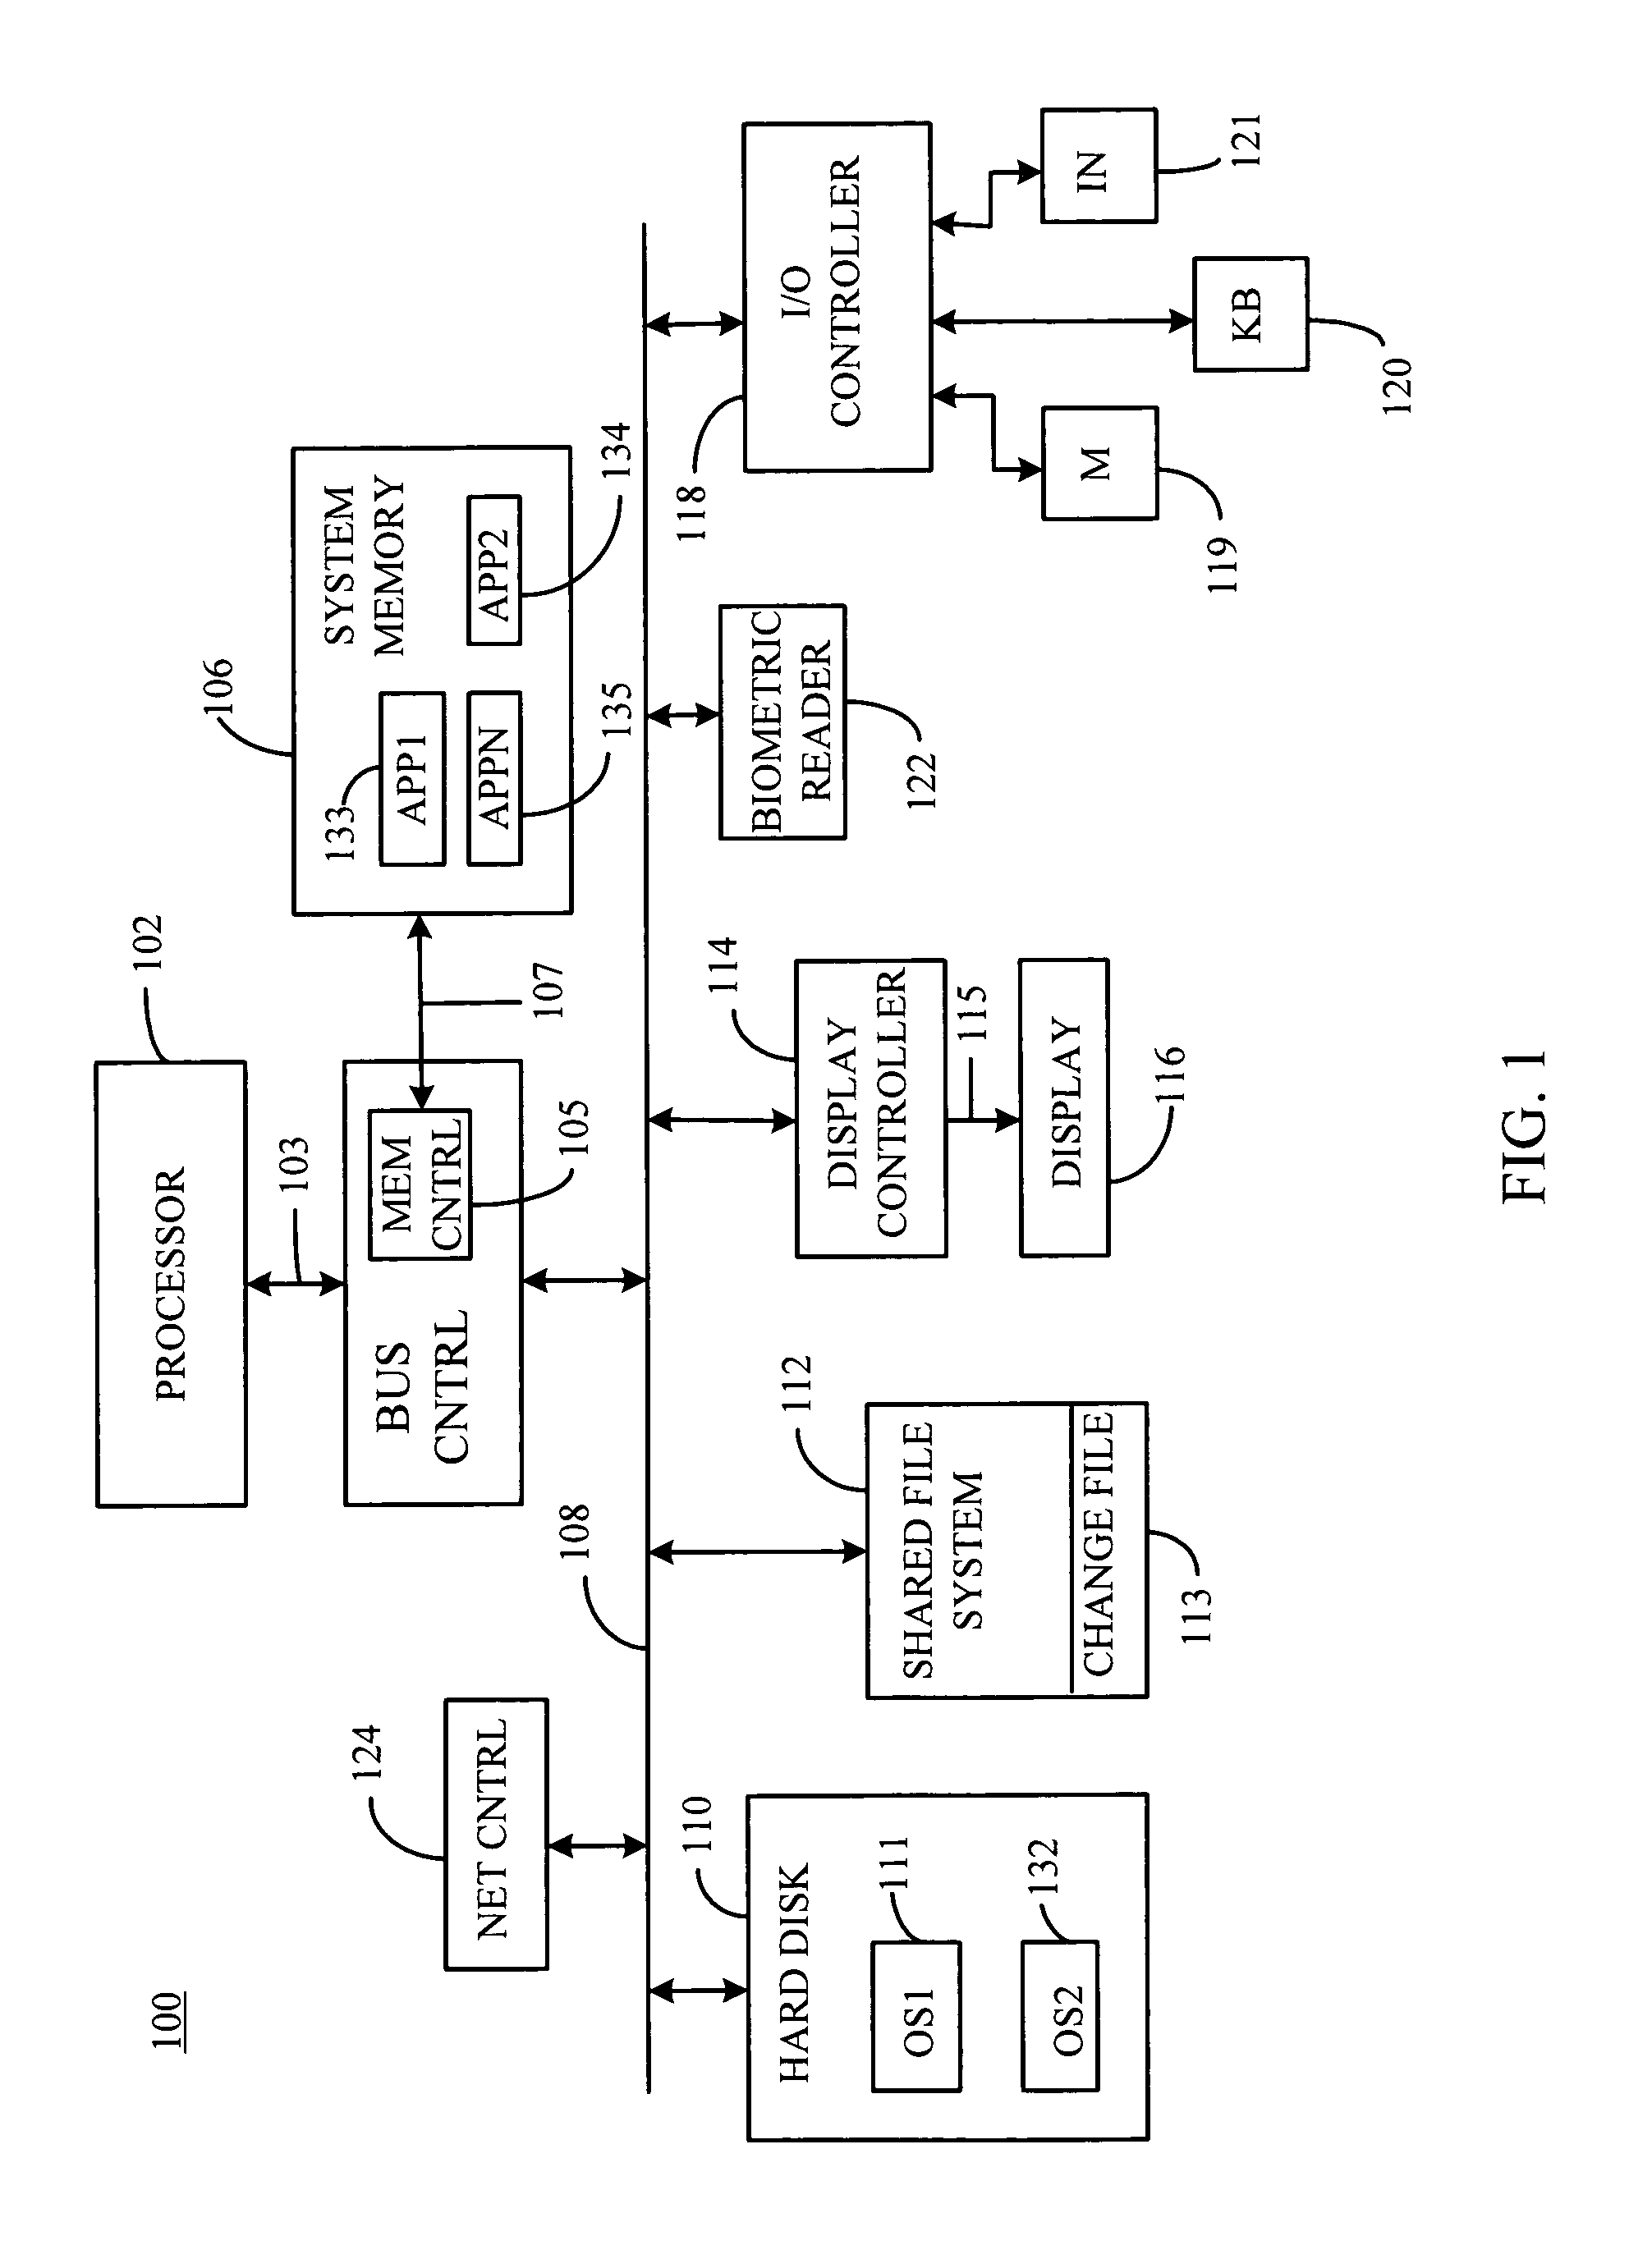 Shared file system management between independent operating systems